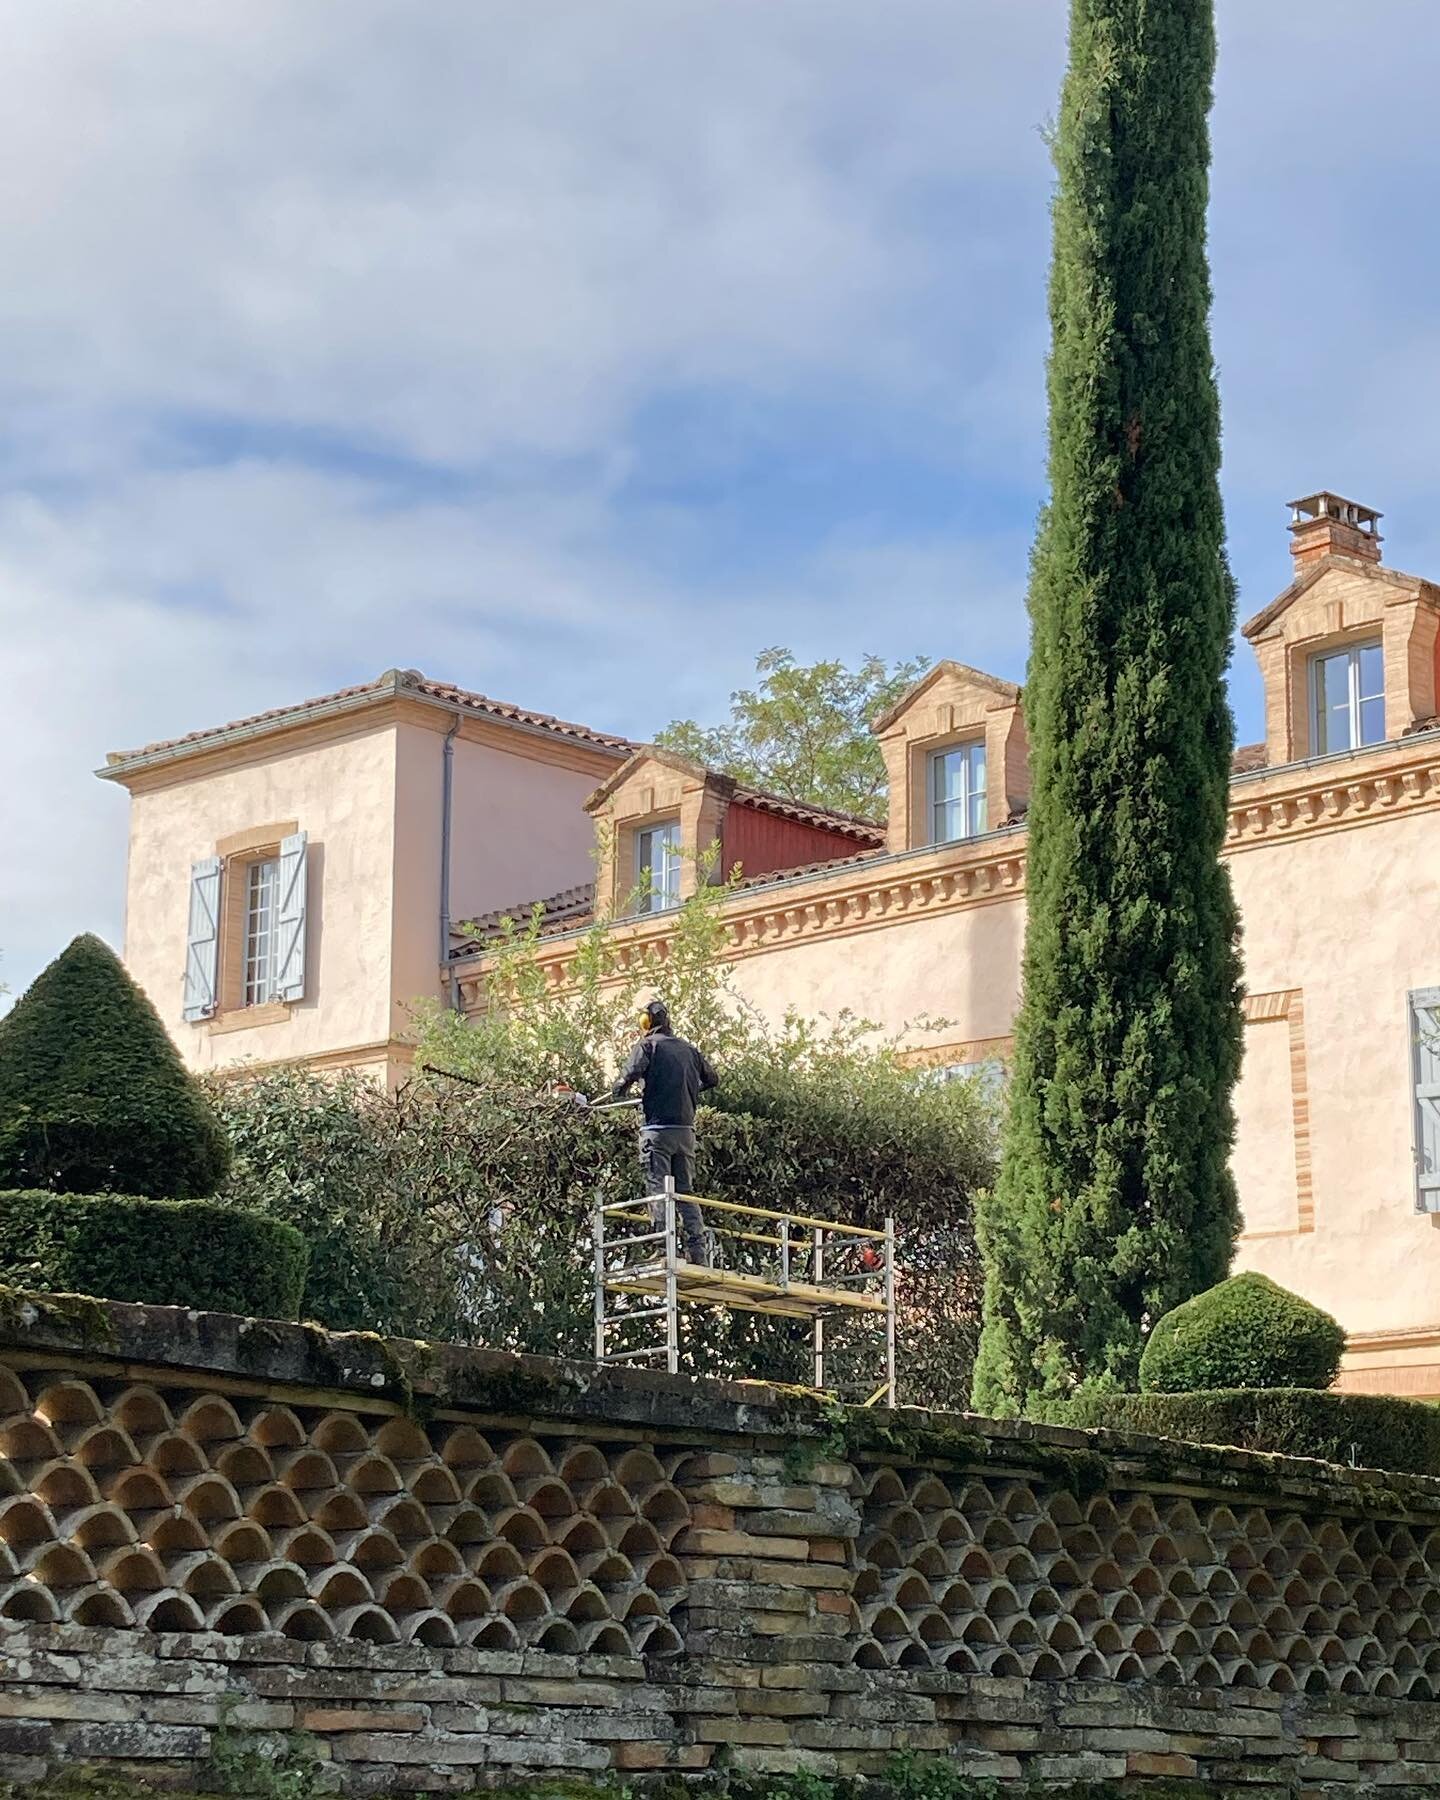 Time for a buzz cut! 

#chateaudumas 
#pruning
#topiary
#oaktrees
#autumnjobsinthegarden 
#southoffrance 
#chateauliving